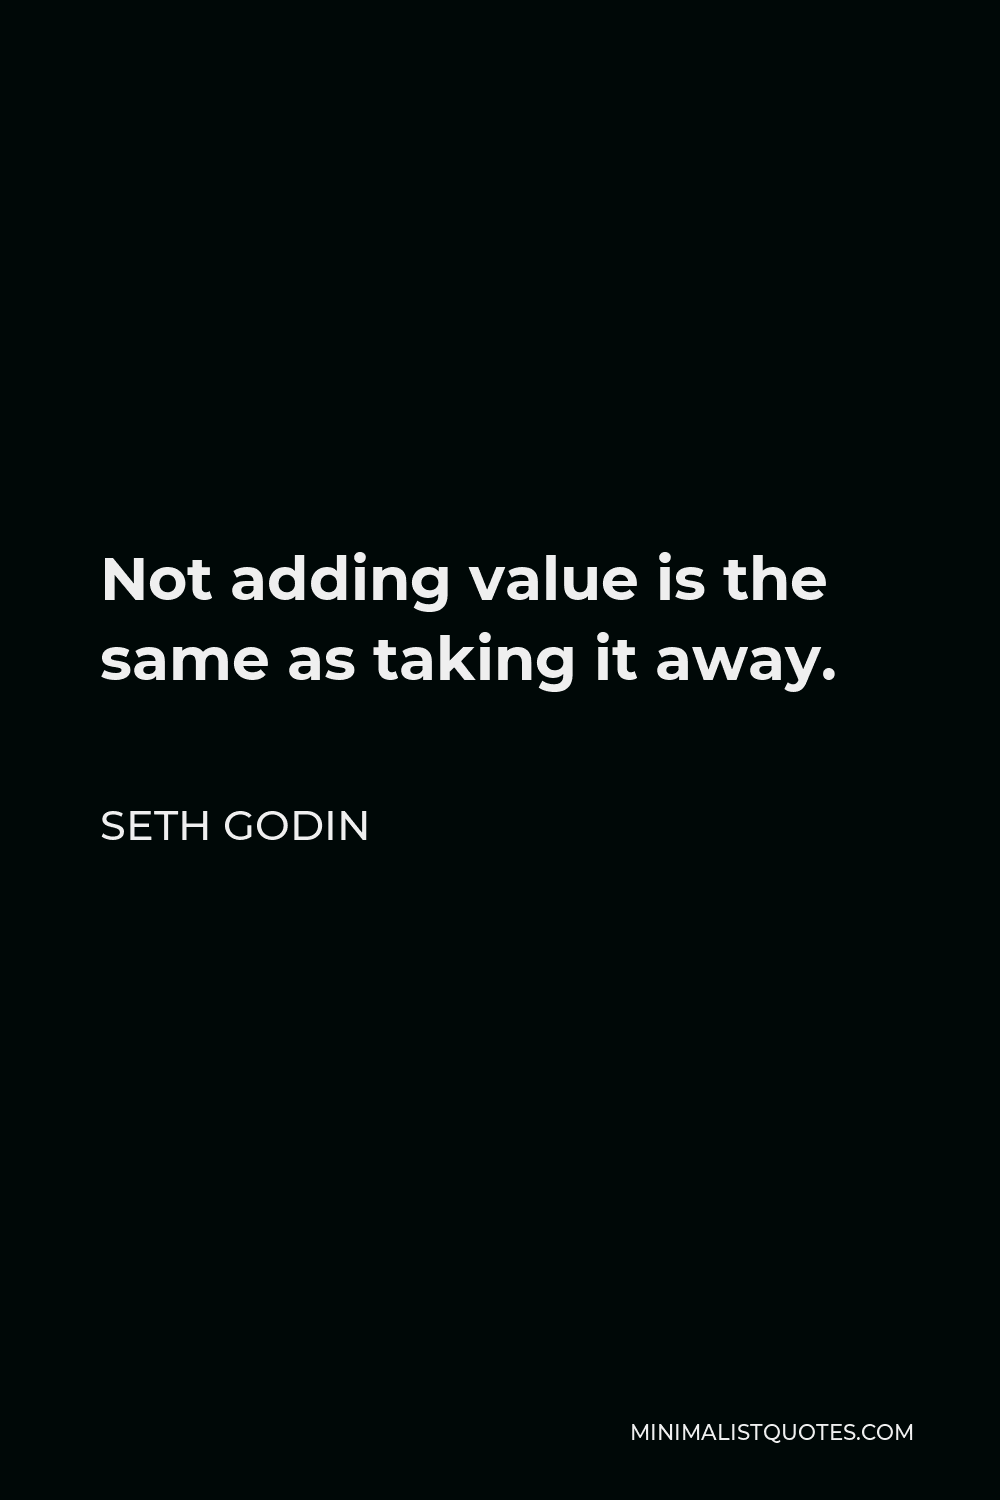 Seth Godin Quote - Not adding value is the same as taking it away.